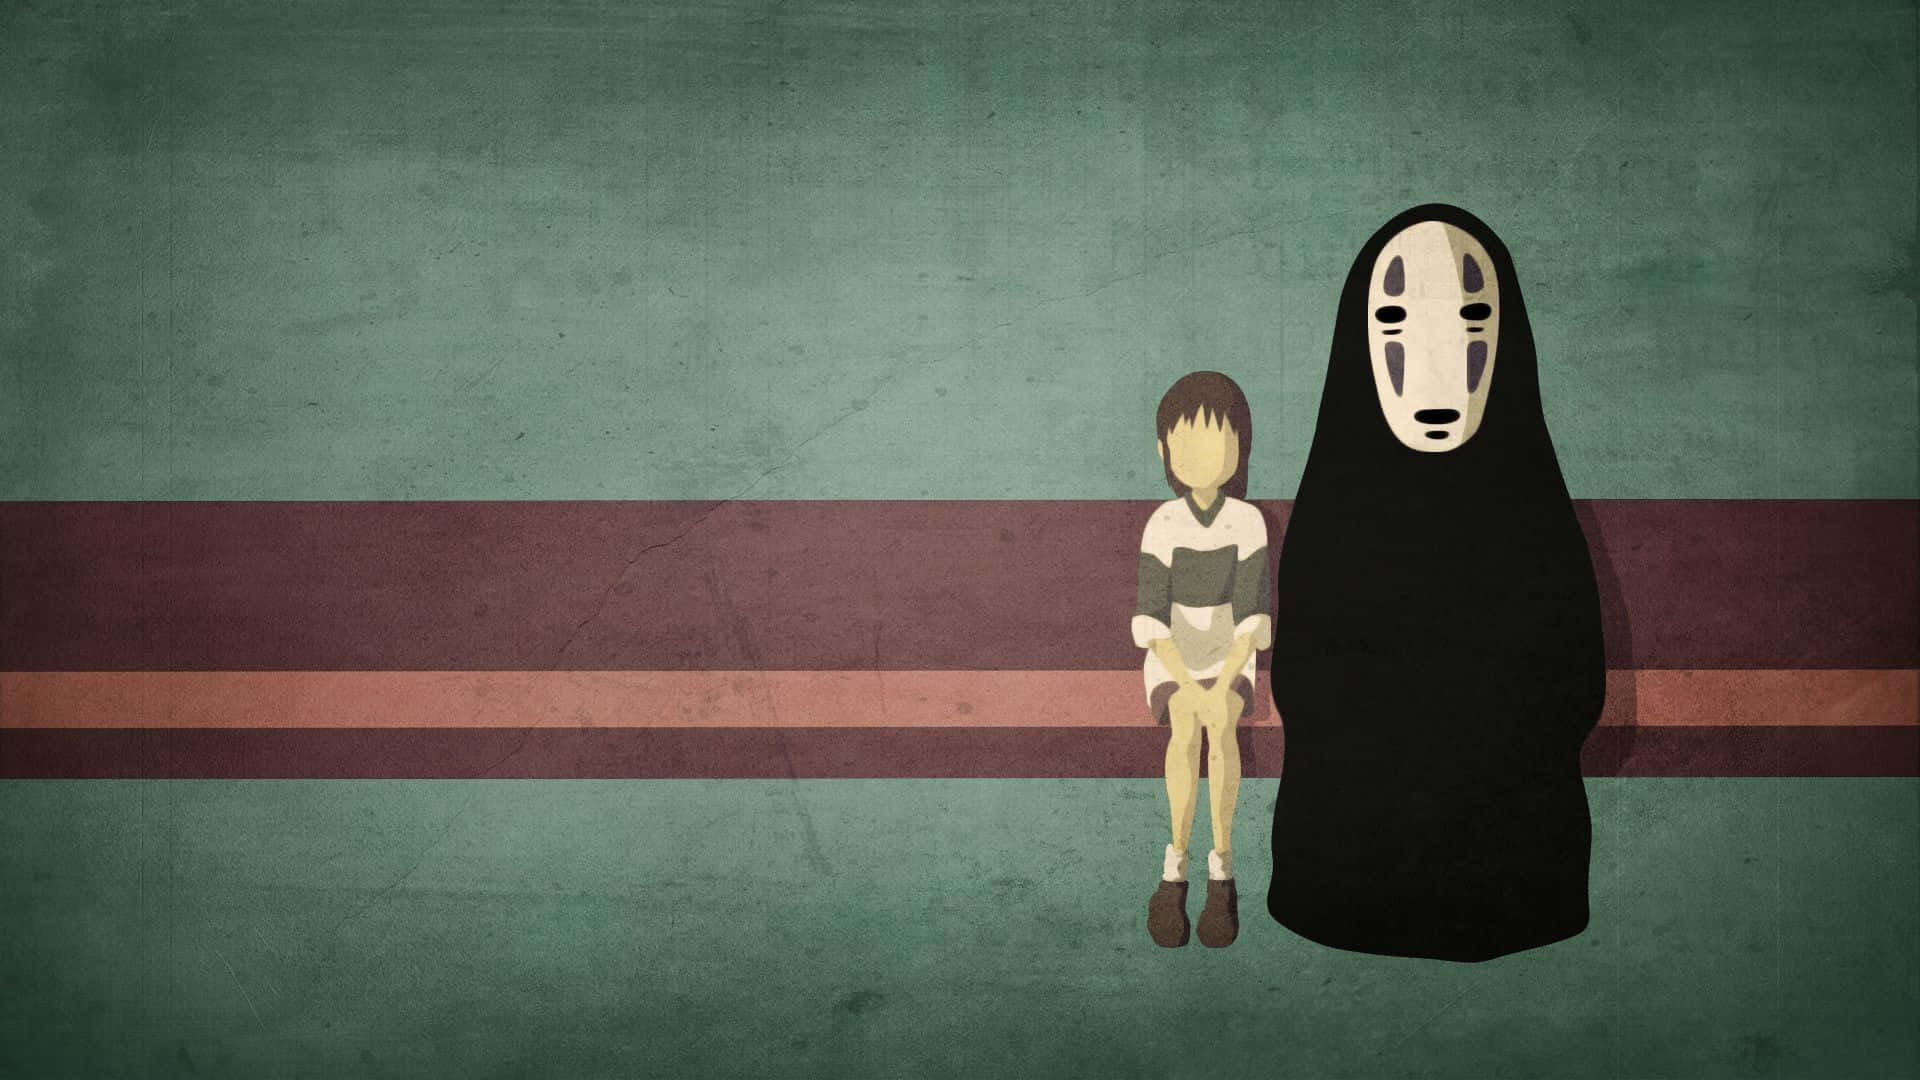 Spiritedaway Chihiro And No Face Minimalist Can Be Translated To Italian As 